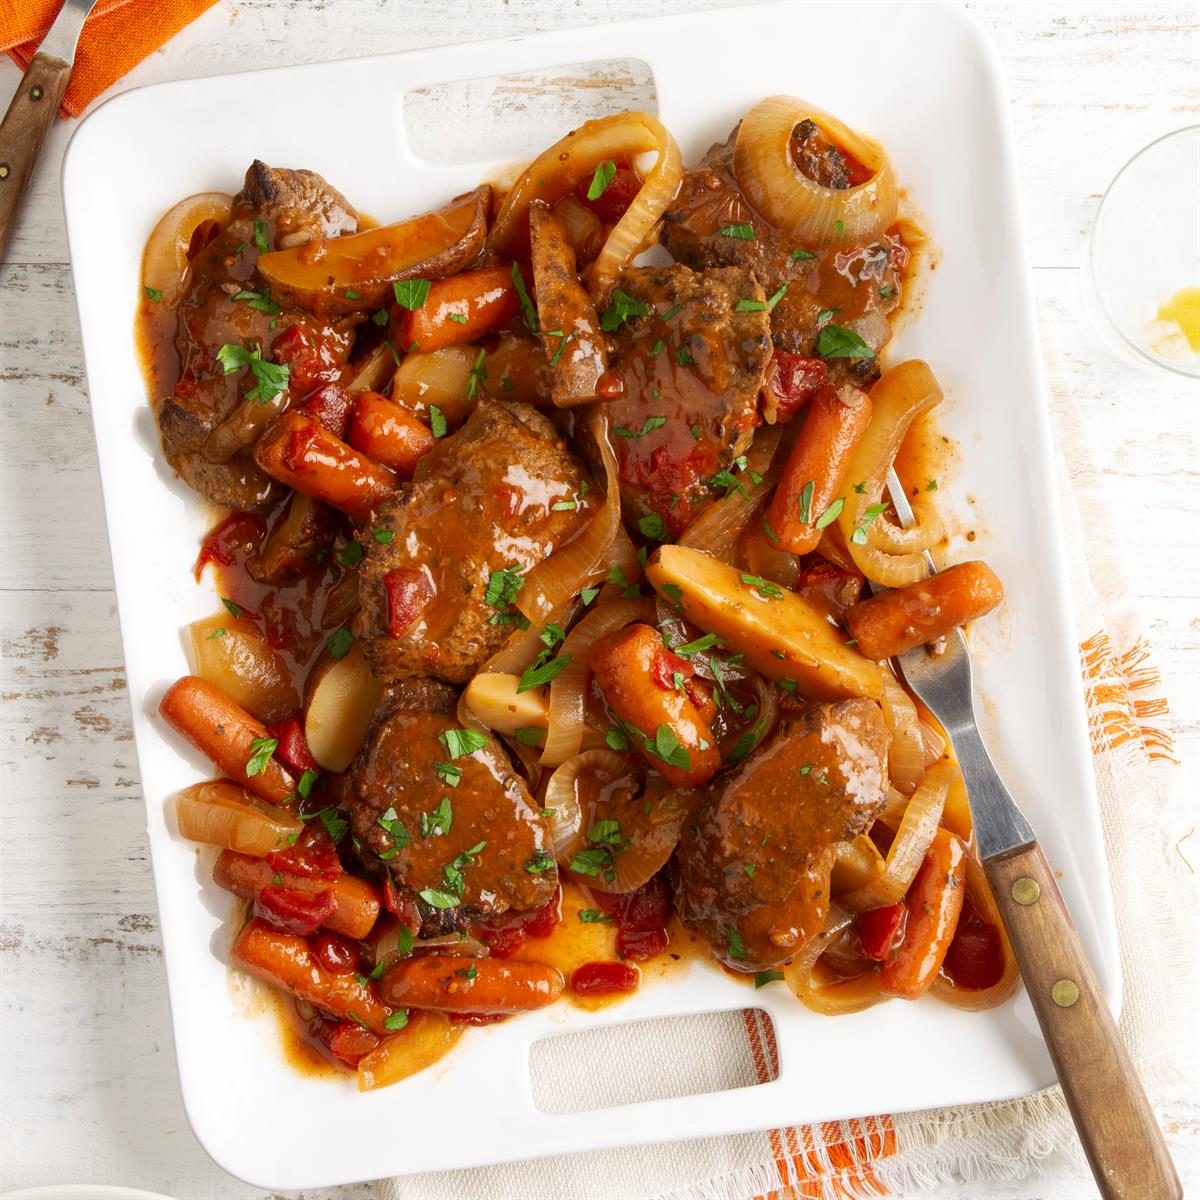 Slow-Cooker Swiss Steak Supper Recipe: How to Make It